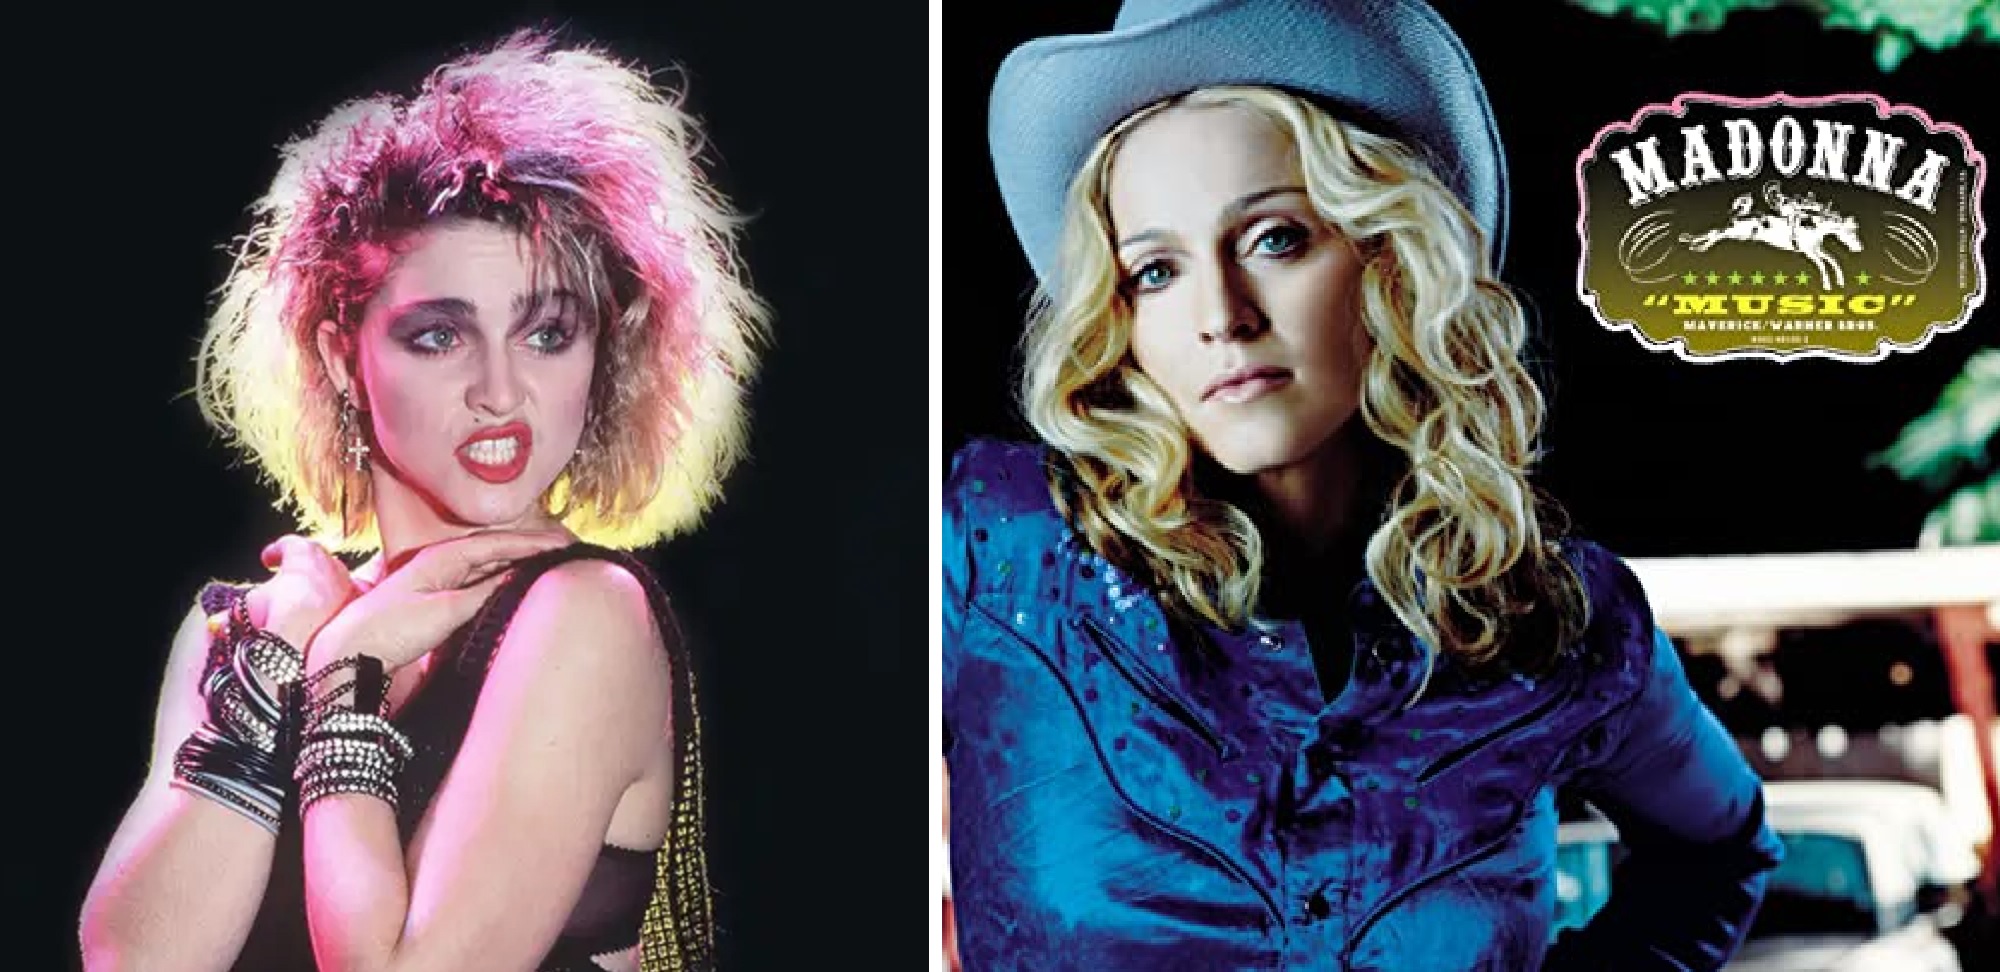 Poll: Which Is Your Favorite Madonna Song Out Of All Her Billboard #1’s? Vote Here!